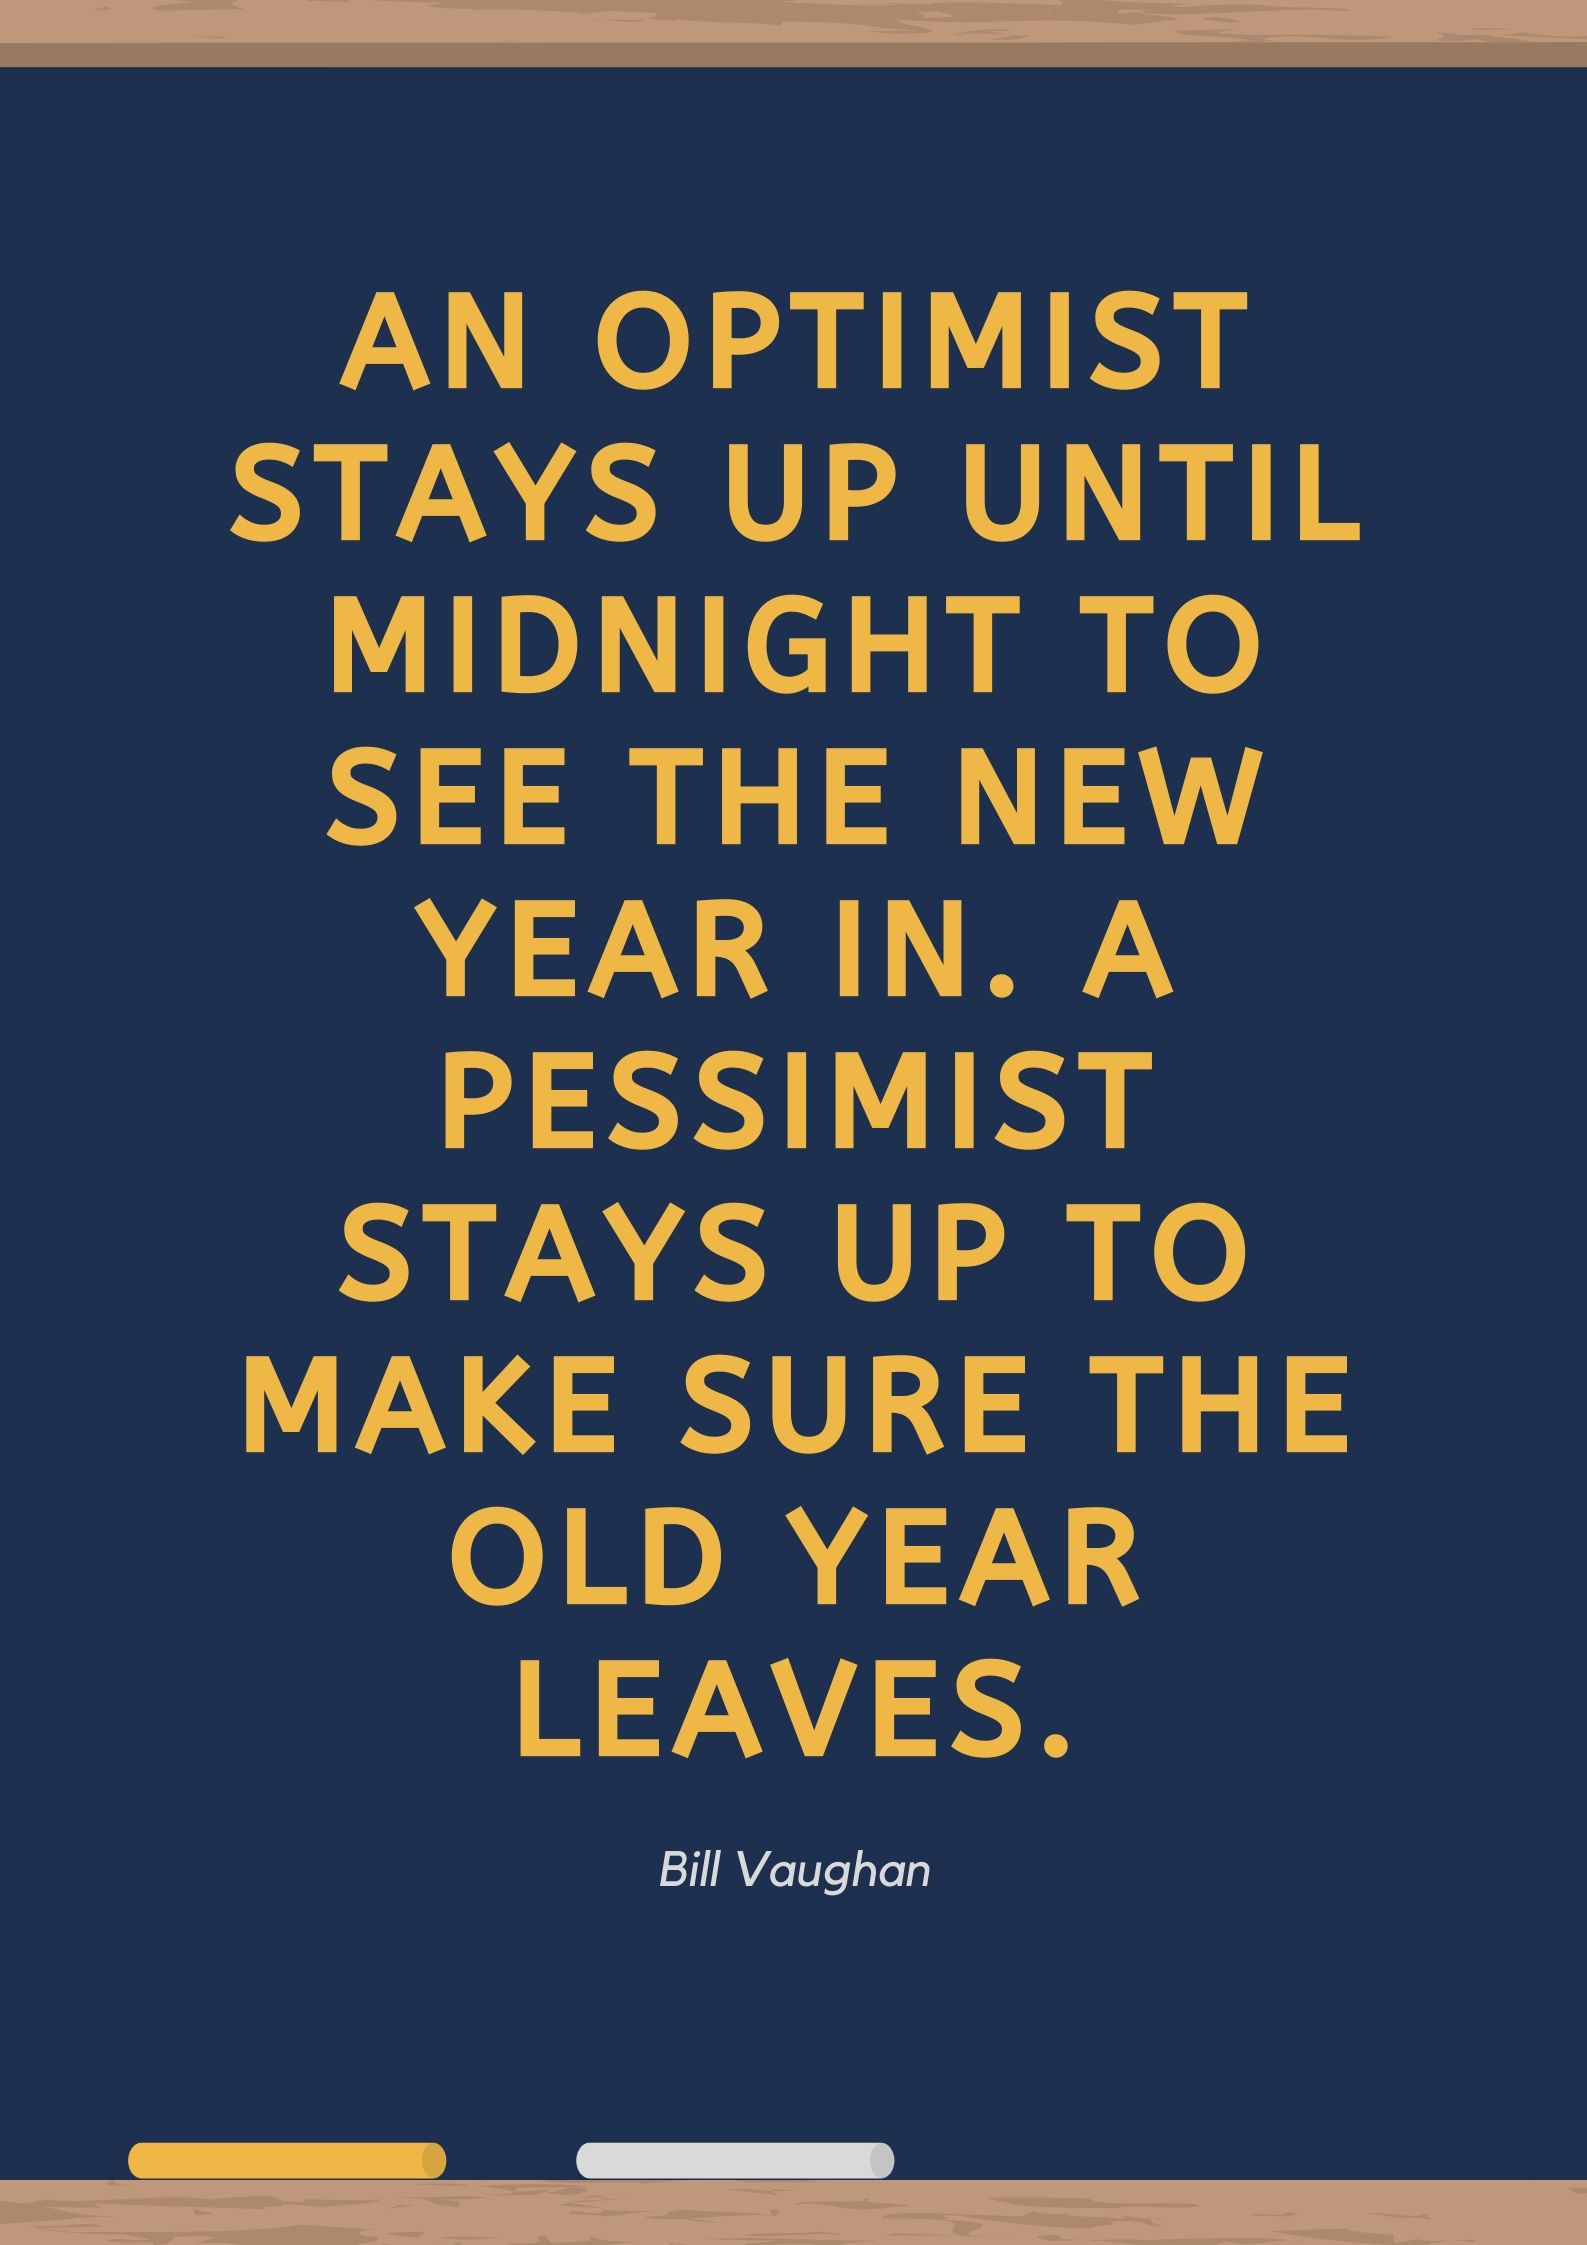 An optimist stays up until midnight to see the New Year in. A pessimist stays up to make sure the old year leaves.